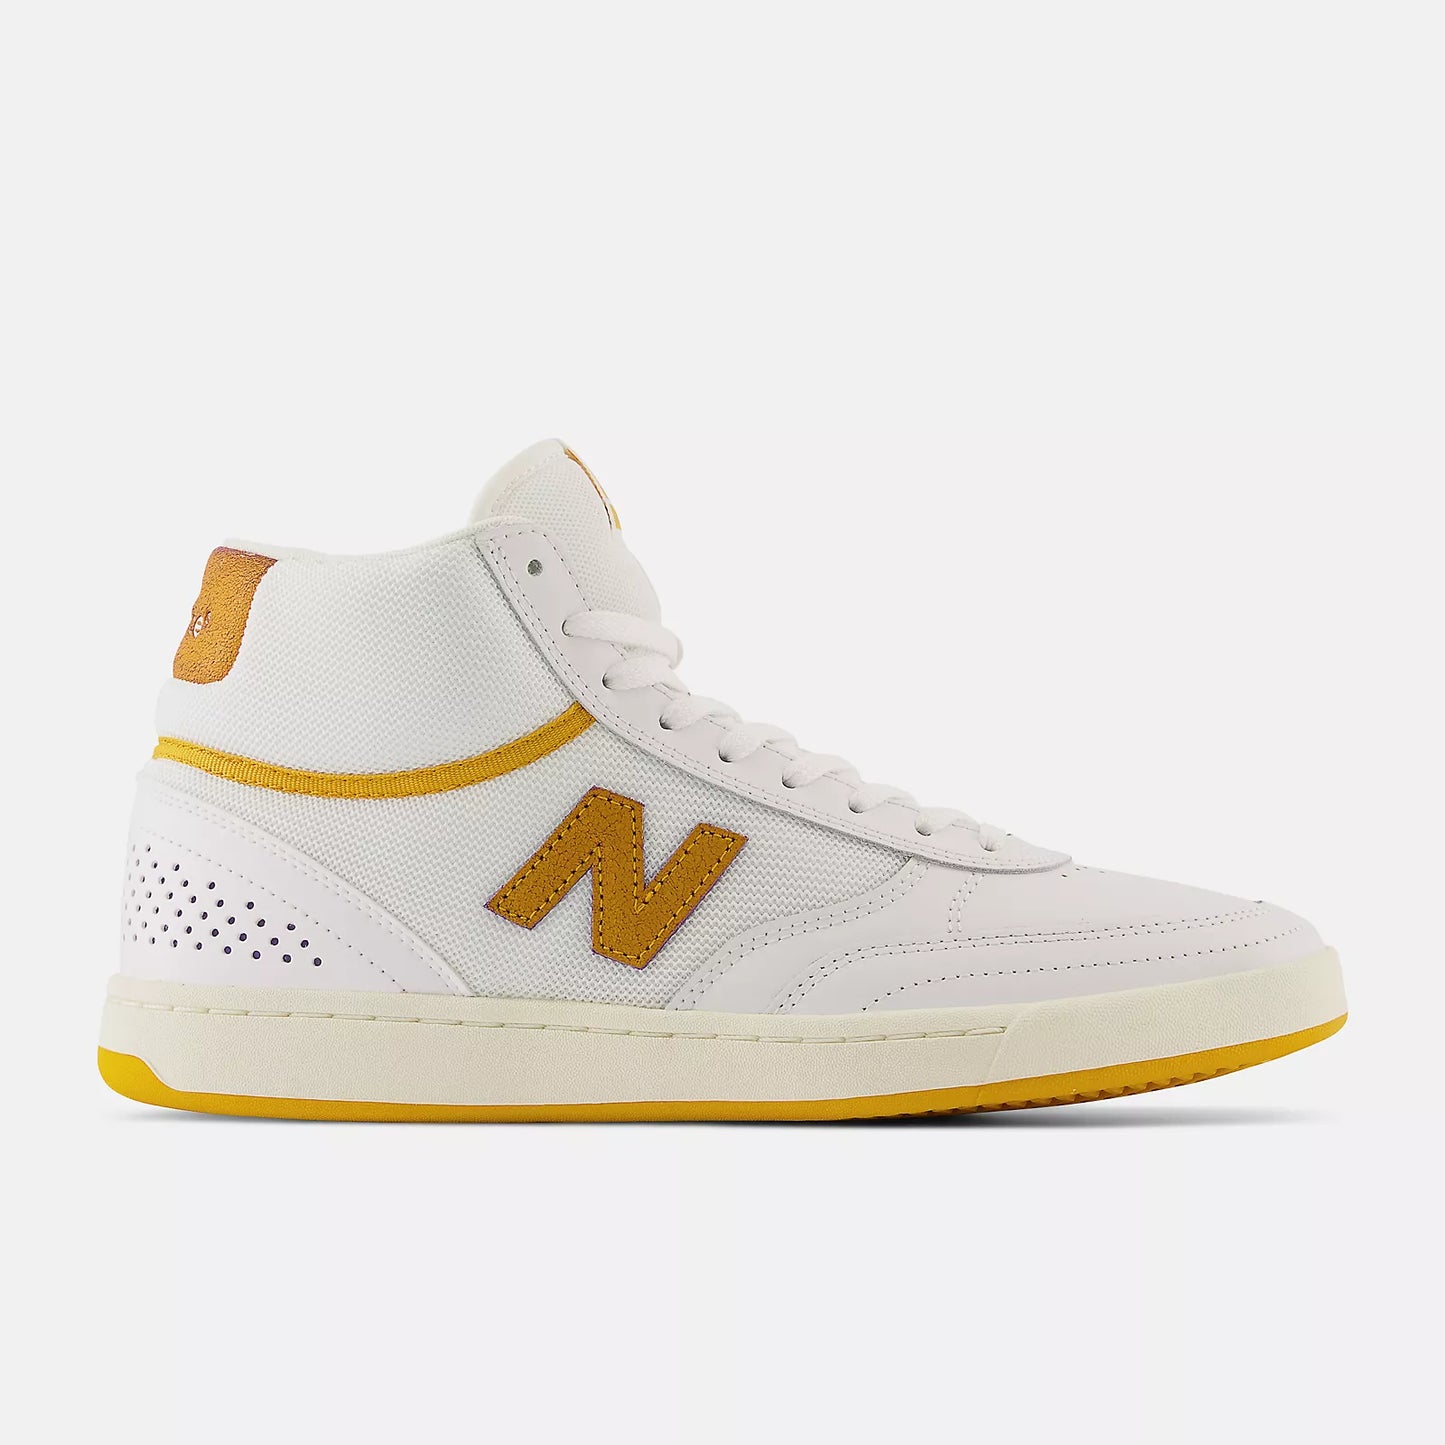 Numeric 440 High Shoe Wht/w/Ylw (size options listed)